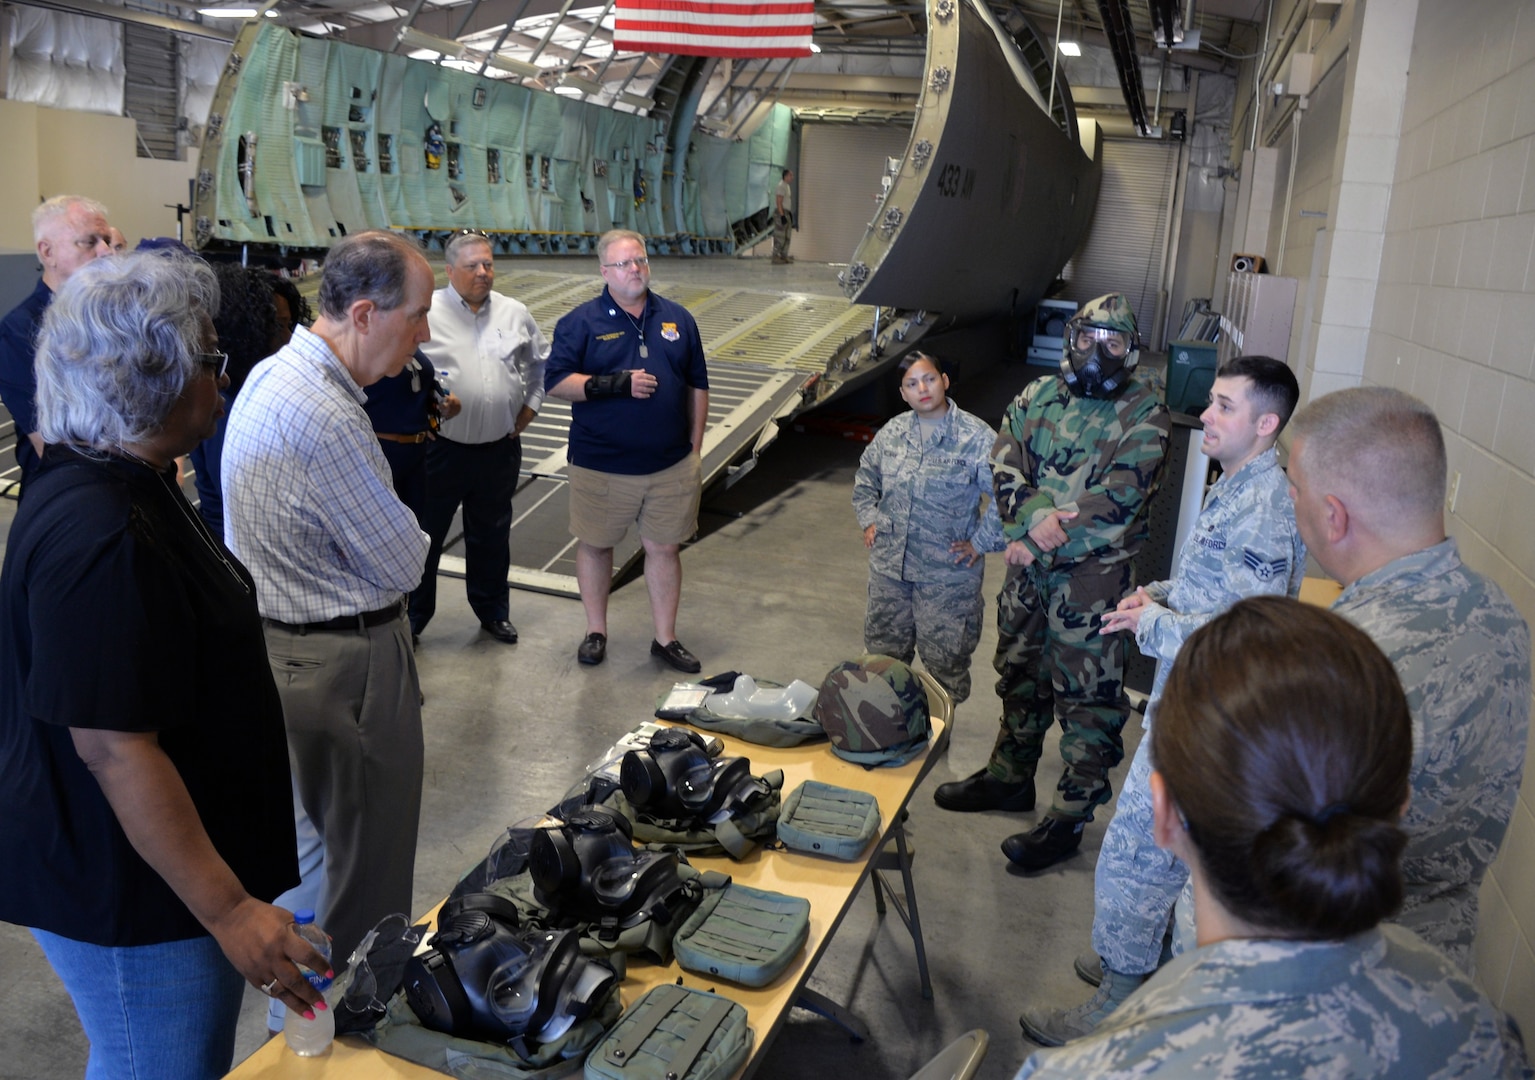 Senior Airman Taylor D. Mogford, 433rd Logistics Readiness Squadron (right), talks to honorary commanders about the proper donning and wear of the joint service lightweight integrated suit technology, a chemical weapon protection suit, during a tour of the 433rd Mission Support Group at Joint Base San Antonio-Lackland Sept. 7.